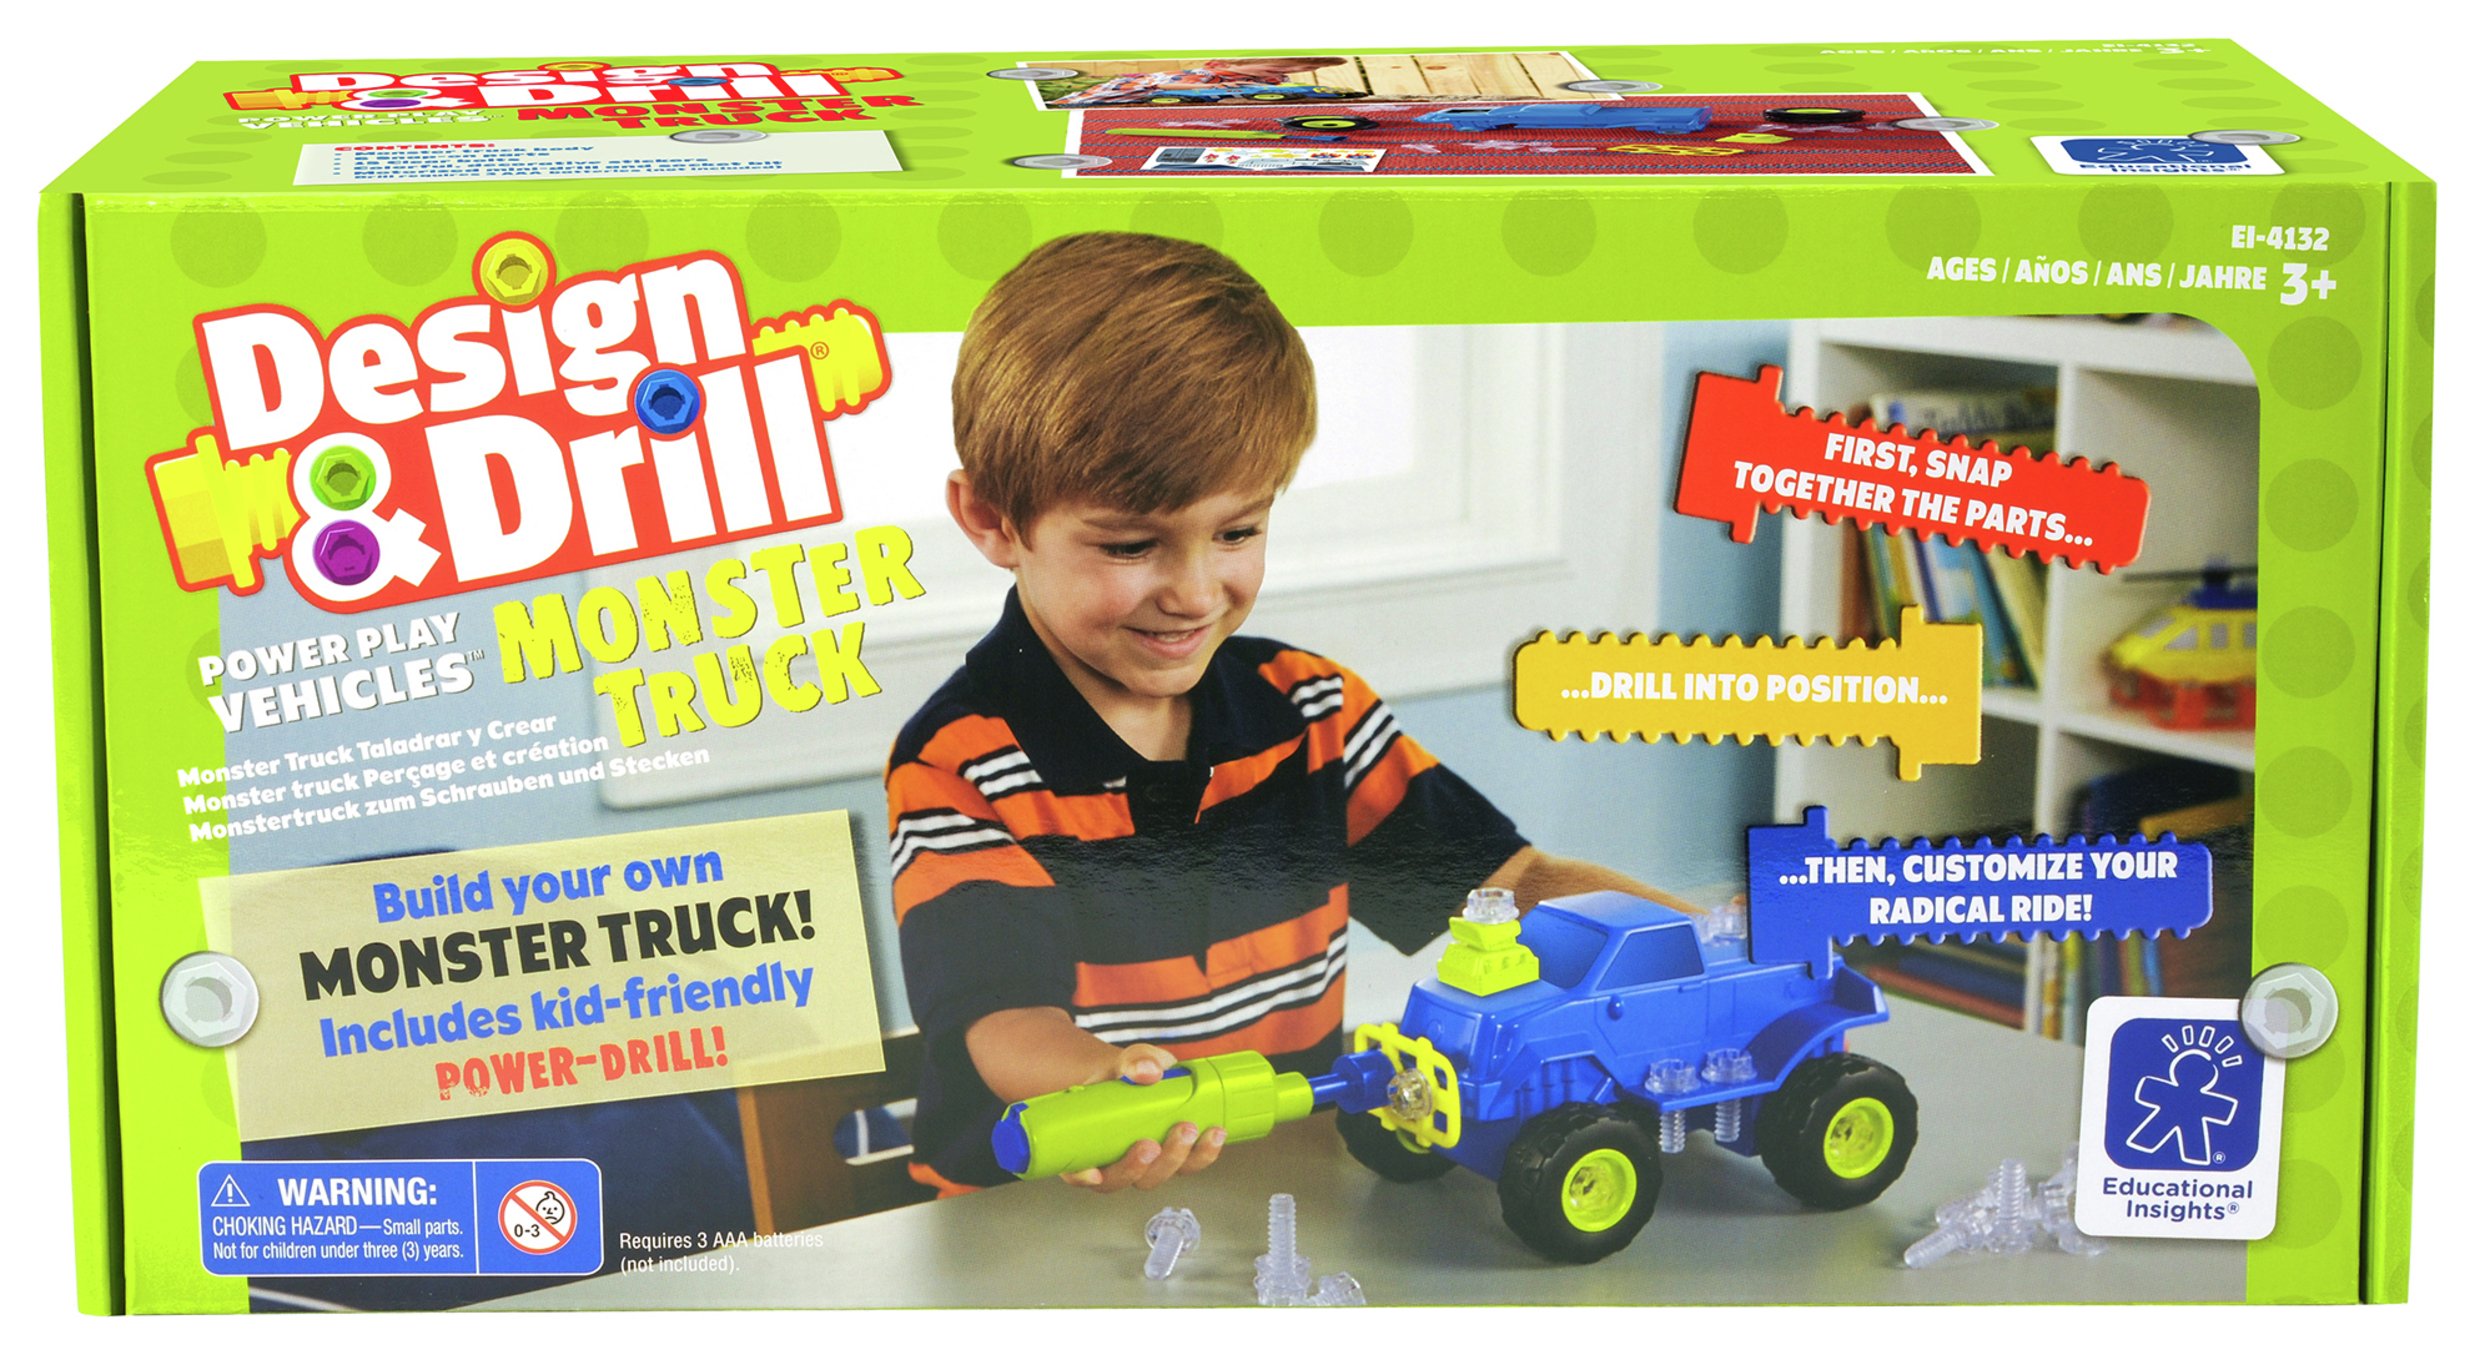 Design and Drill Power Play Vehicles Monster Truck